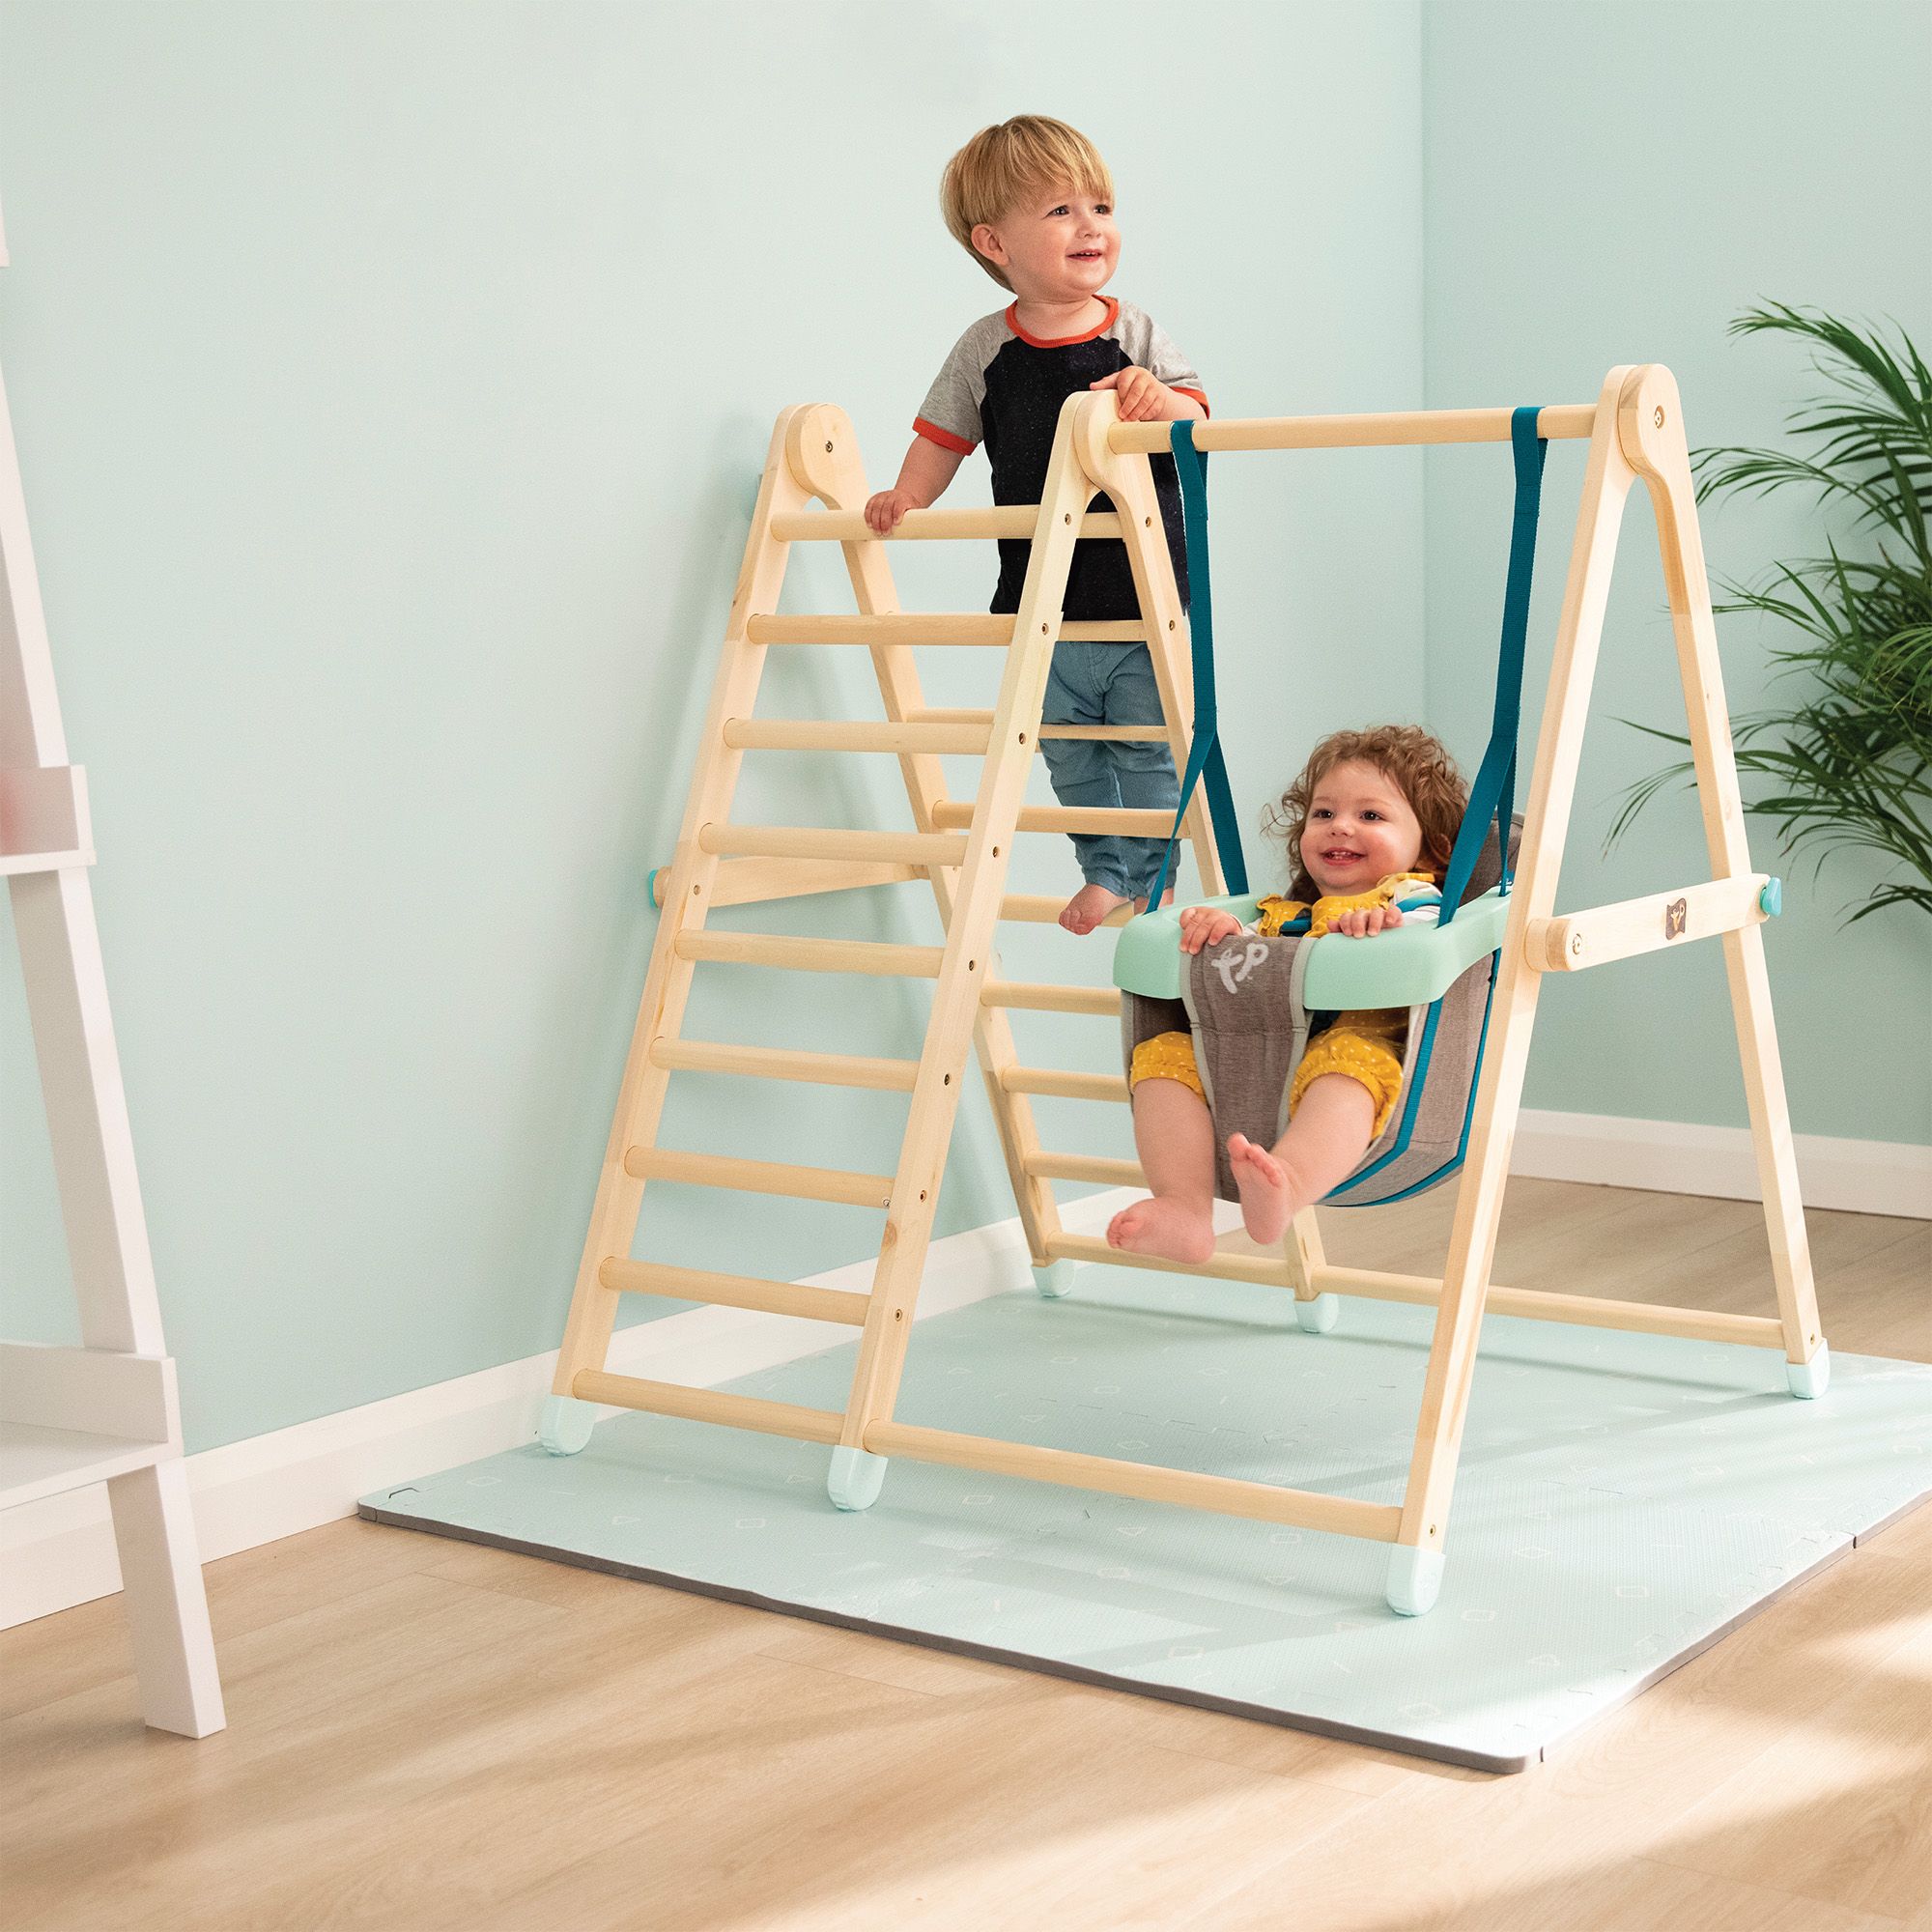 TP Toys Active-tots Climbing frame with swing